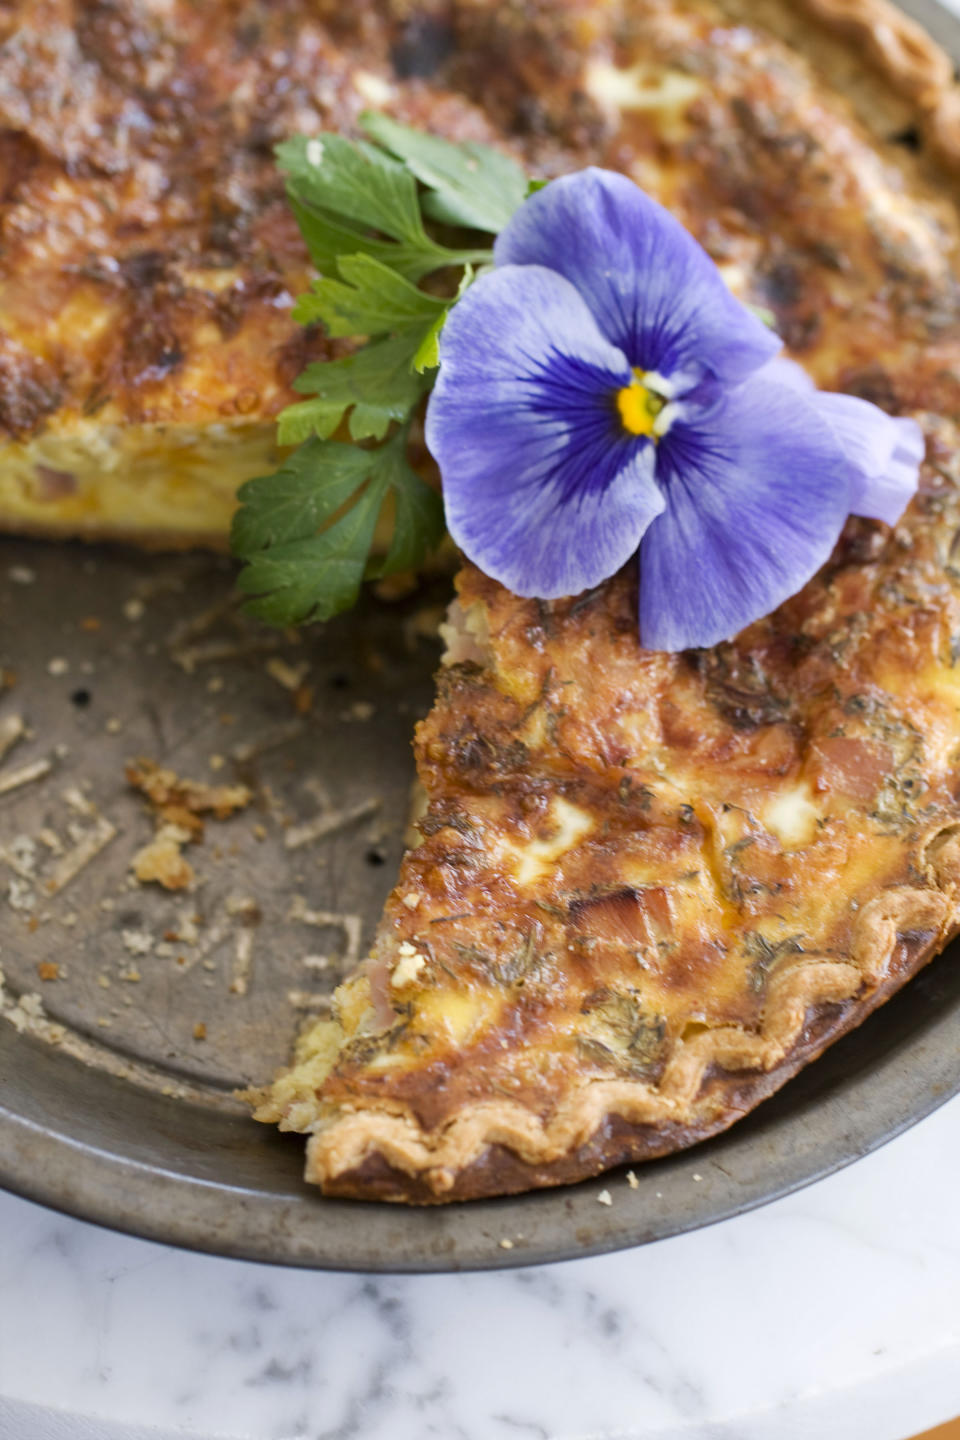 In this image taken on April 22, 2013, a ham and cheddar quiche for Mother's Day is shown in Concord, N.H. (AP Photo/Matthew Mead)